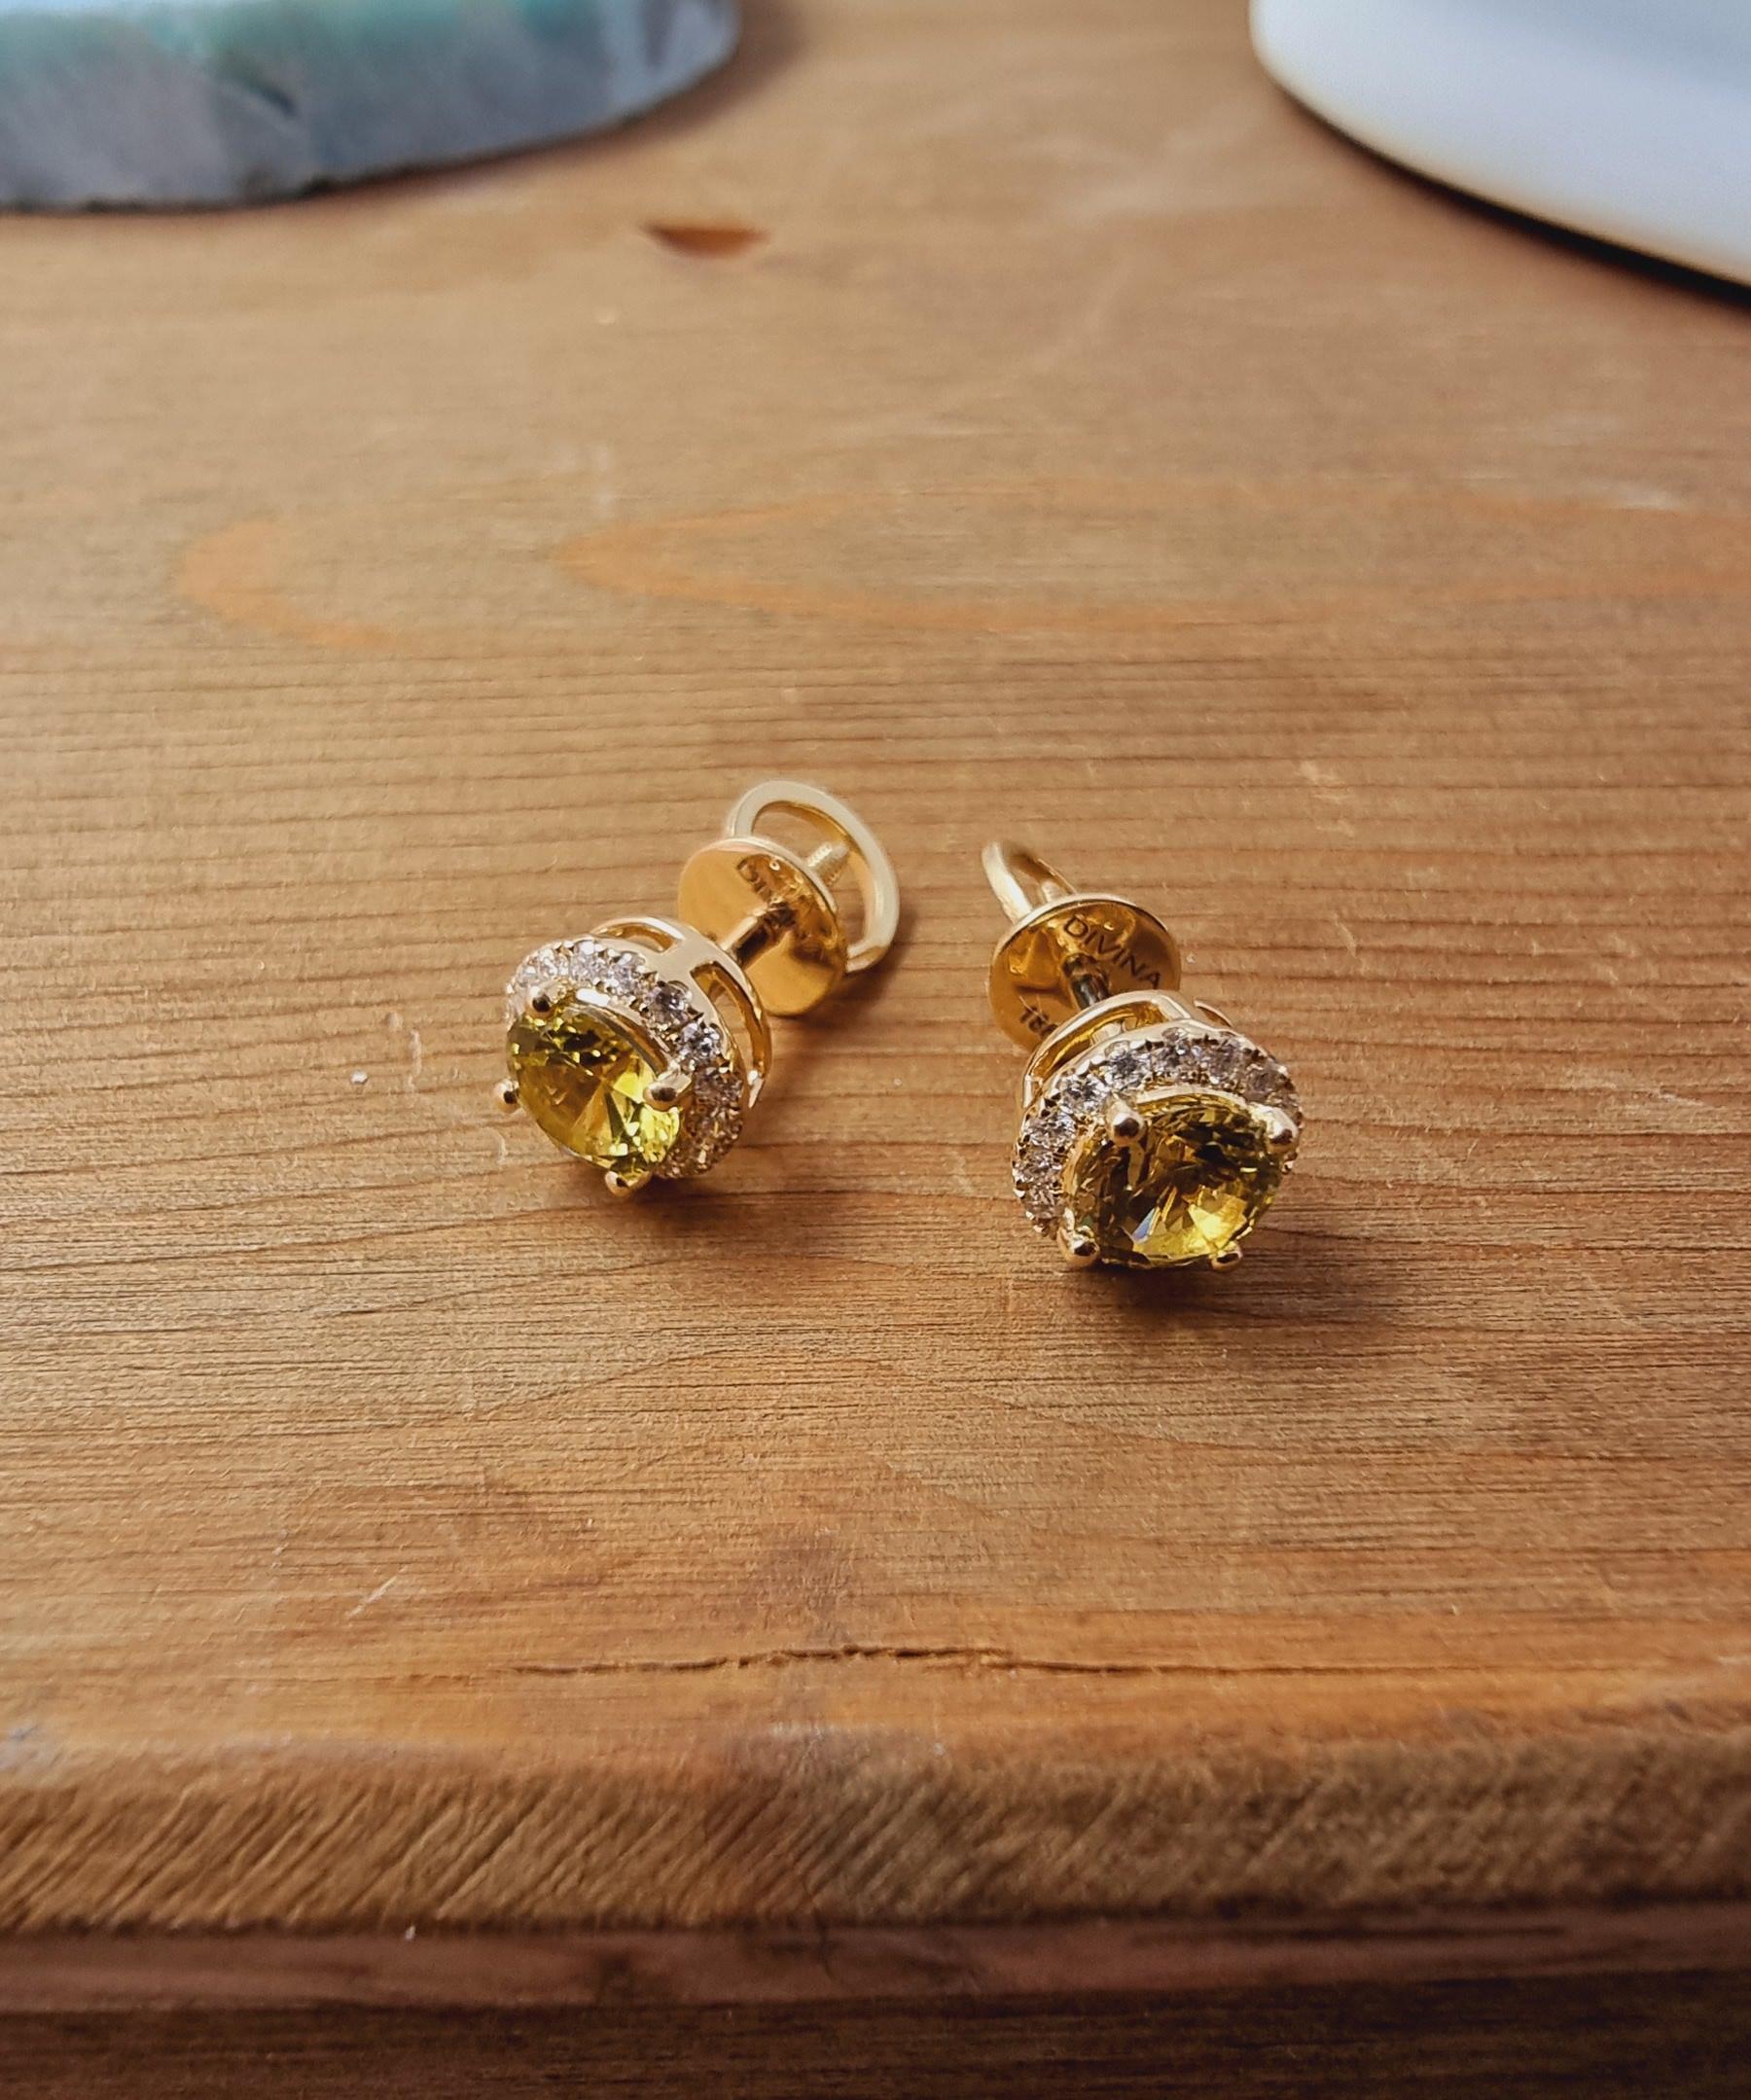 Round Cut 18KY Unique Earring Studs with White Accent Diamonds and Mali Garnet 1.07 TCW For Sale